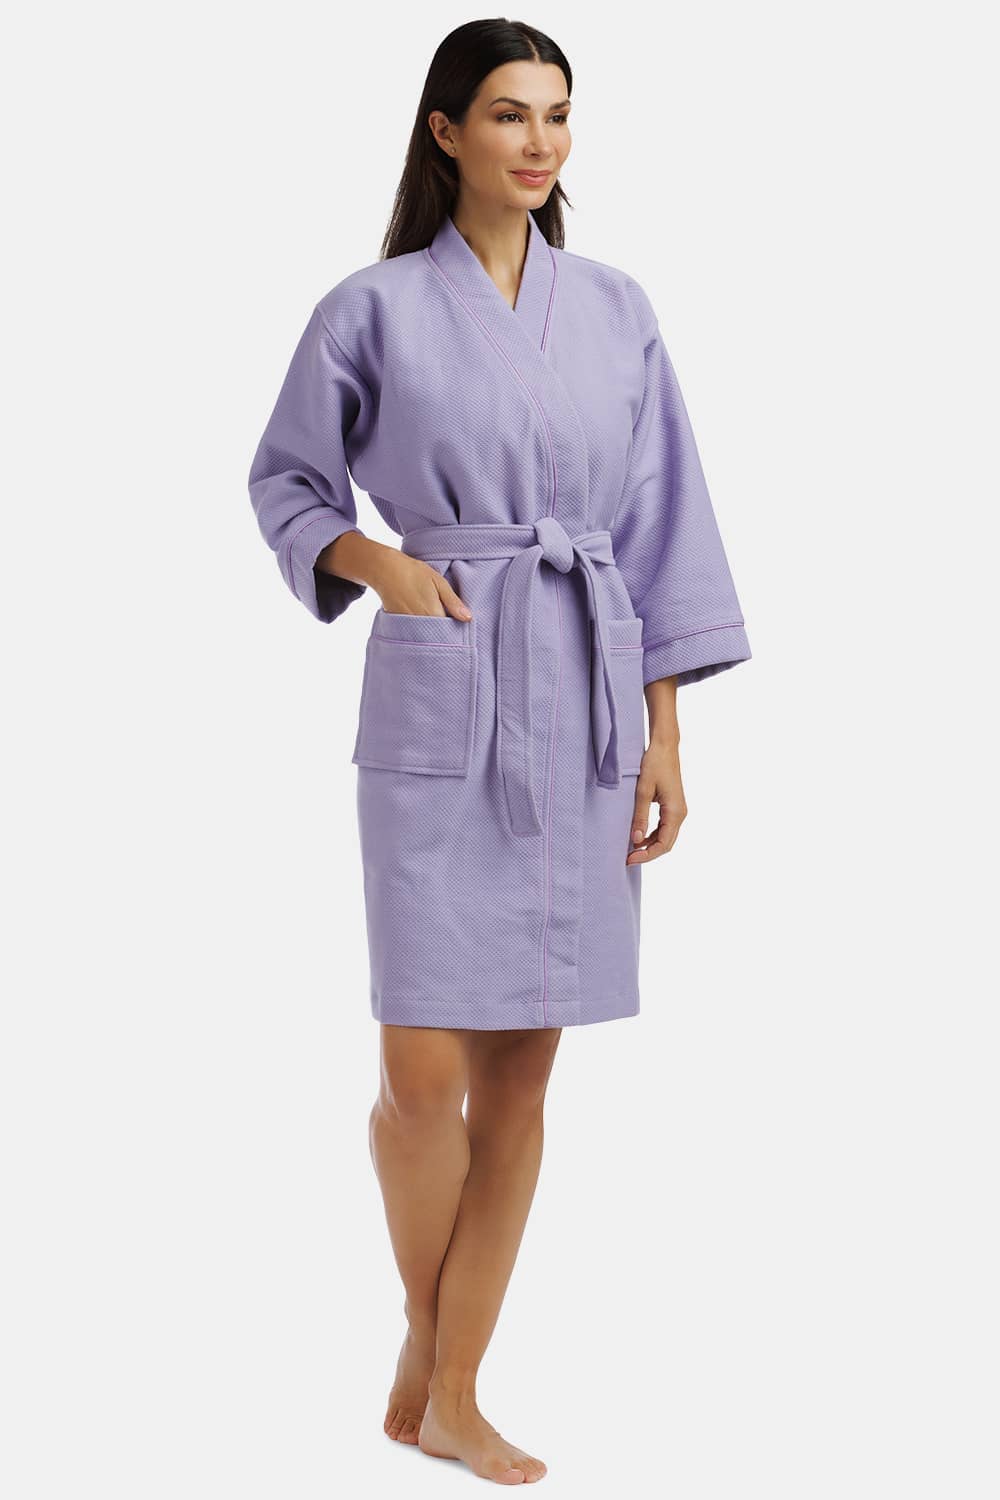 Women's Modal Kimono Resort Spa Robe with Quilted Design Womens>Sleep and Lounge>Robe Fishers Finery Lavender X-Small 